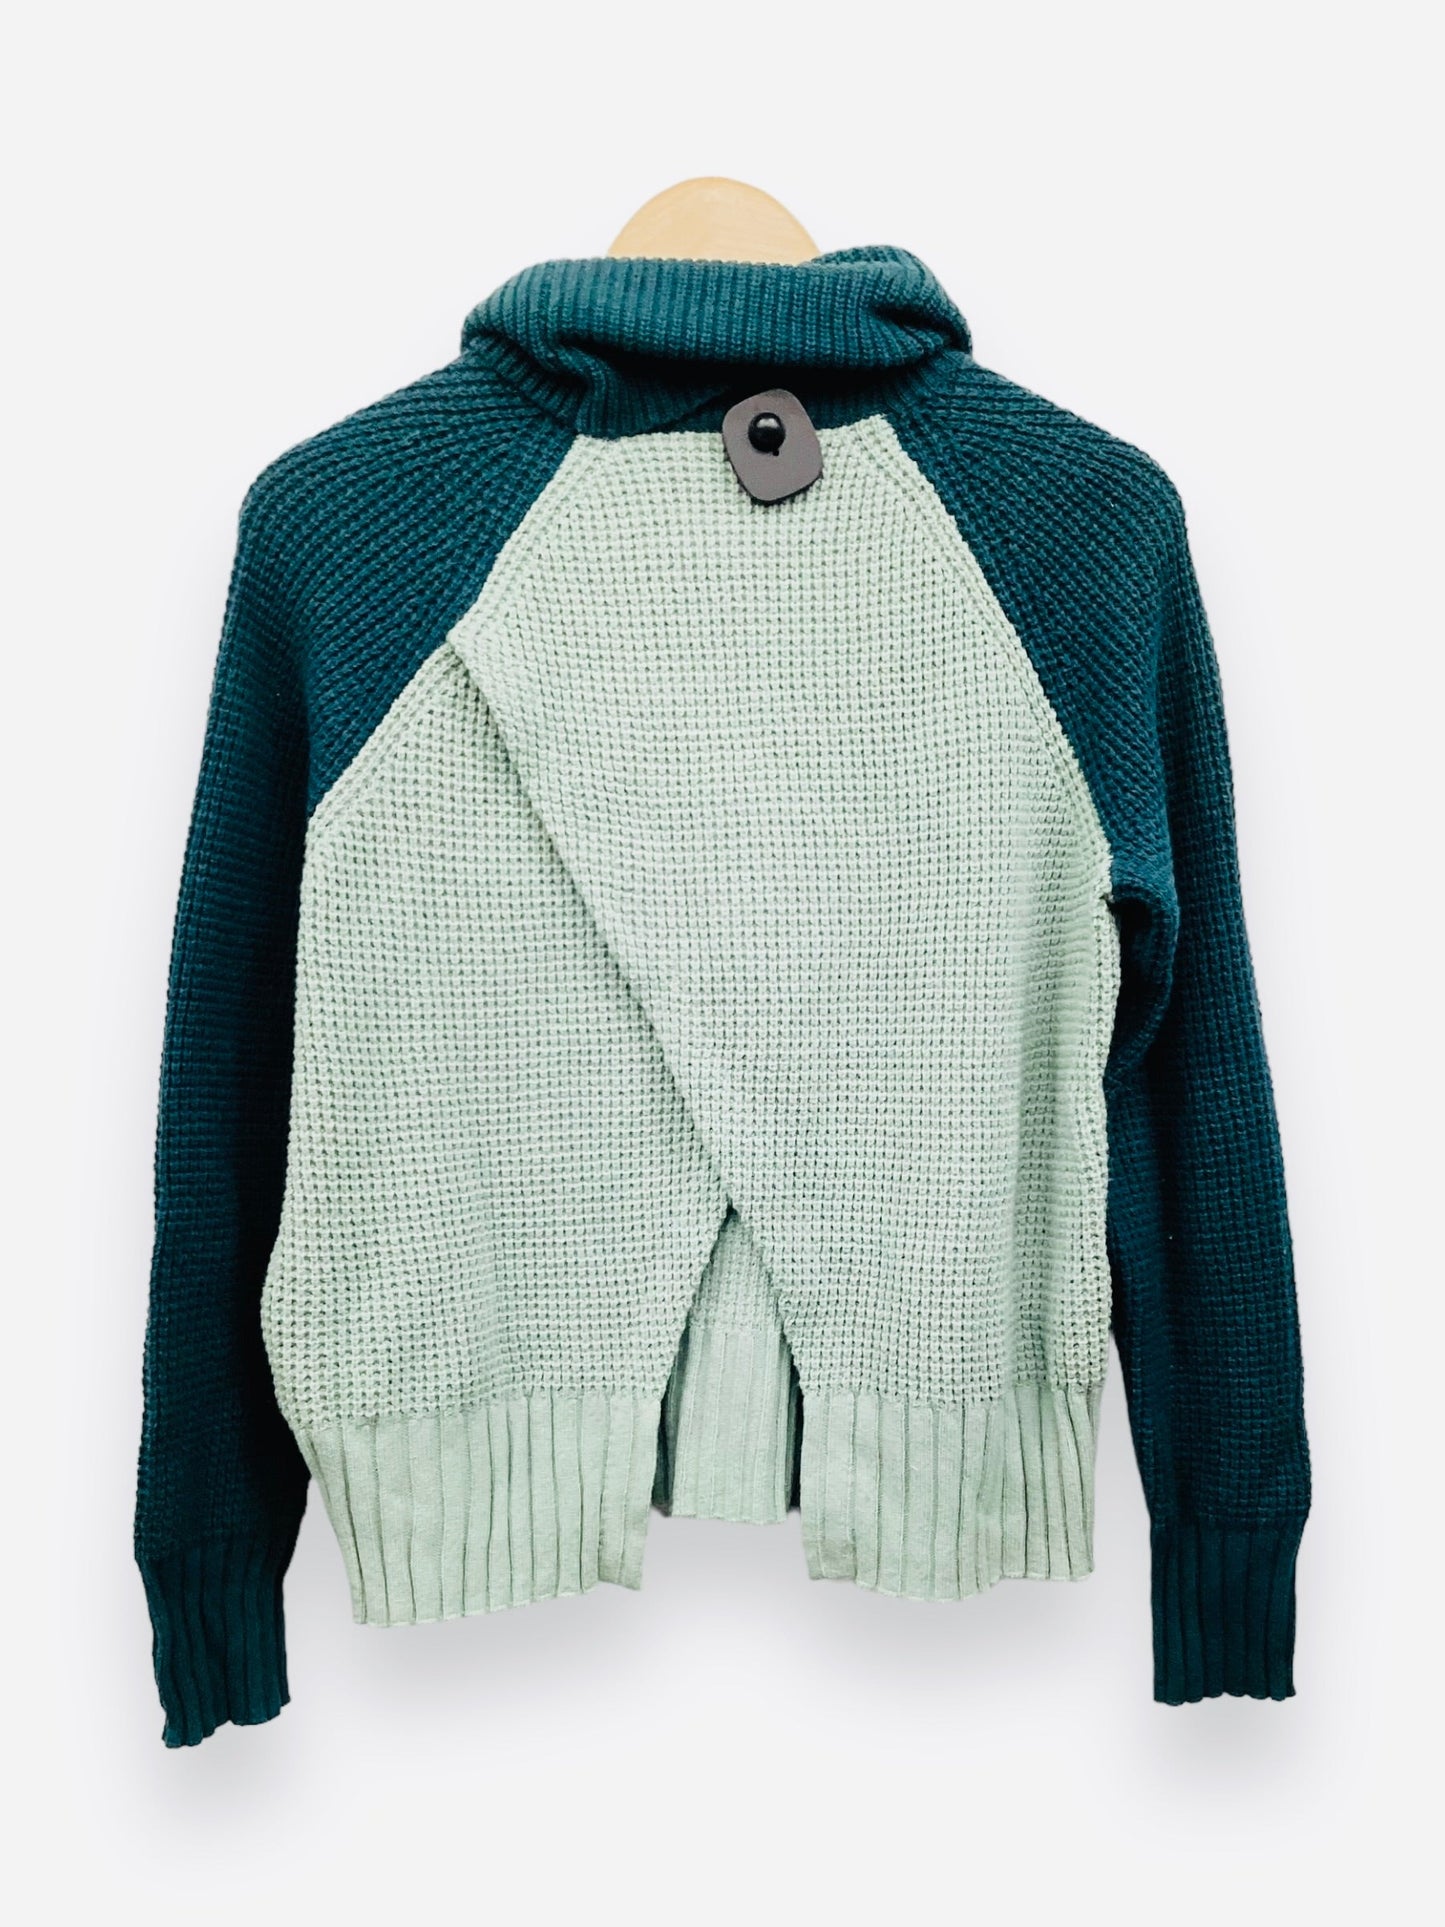 NWT Teal Green Sweater Madewell, Size S